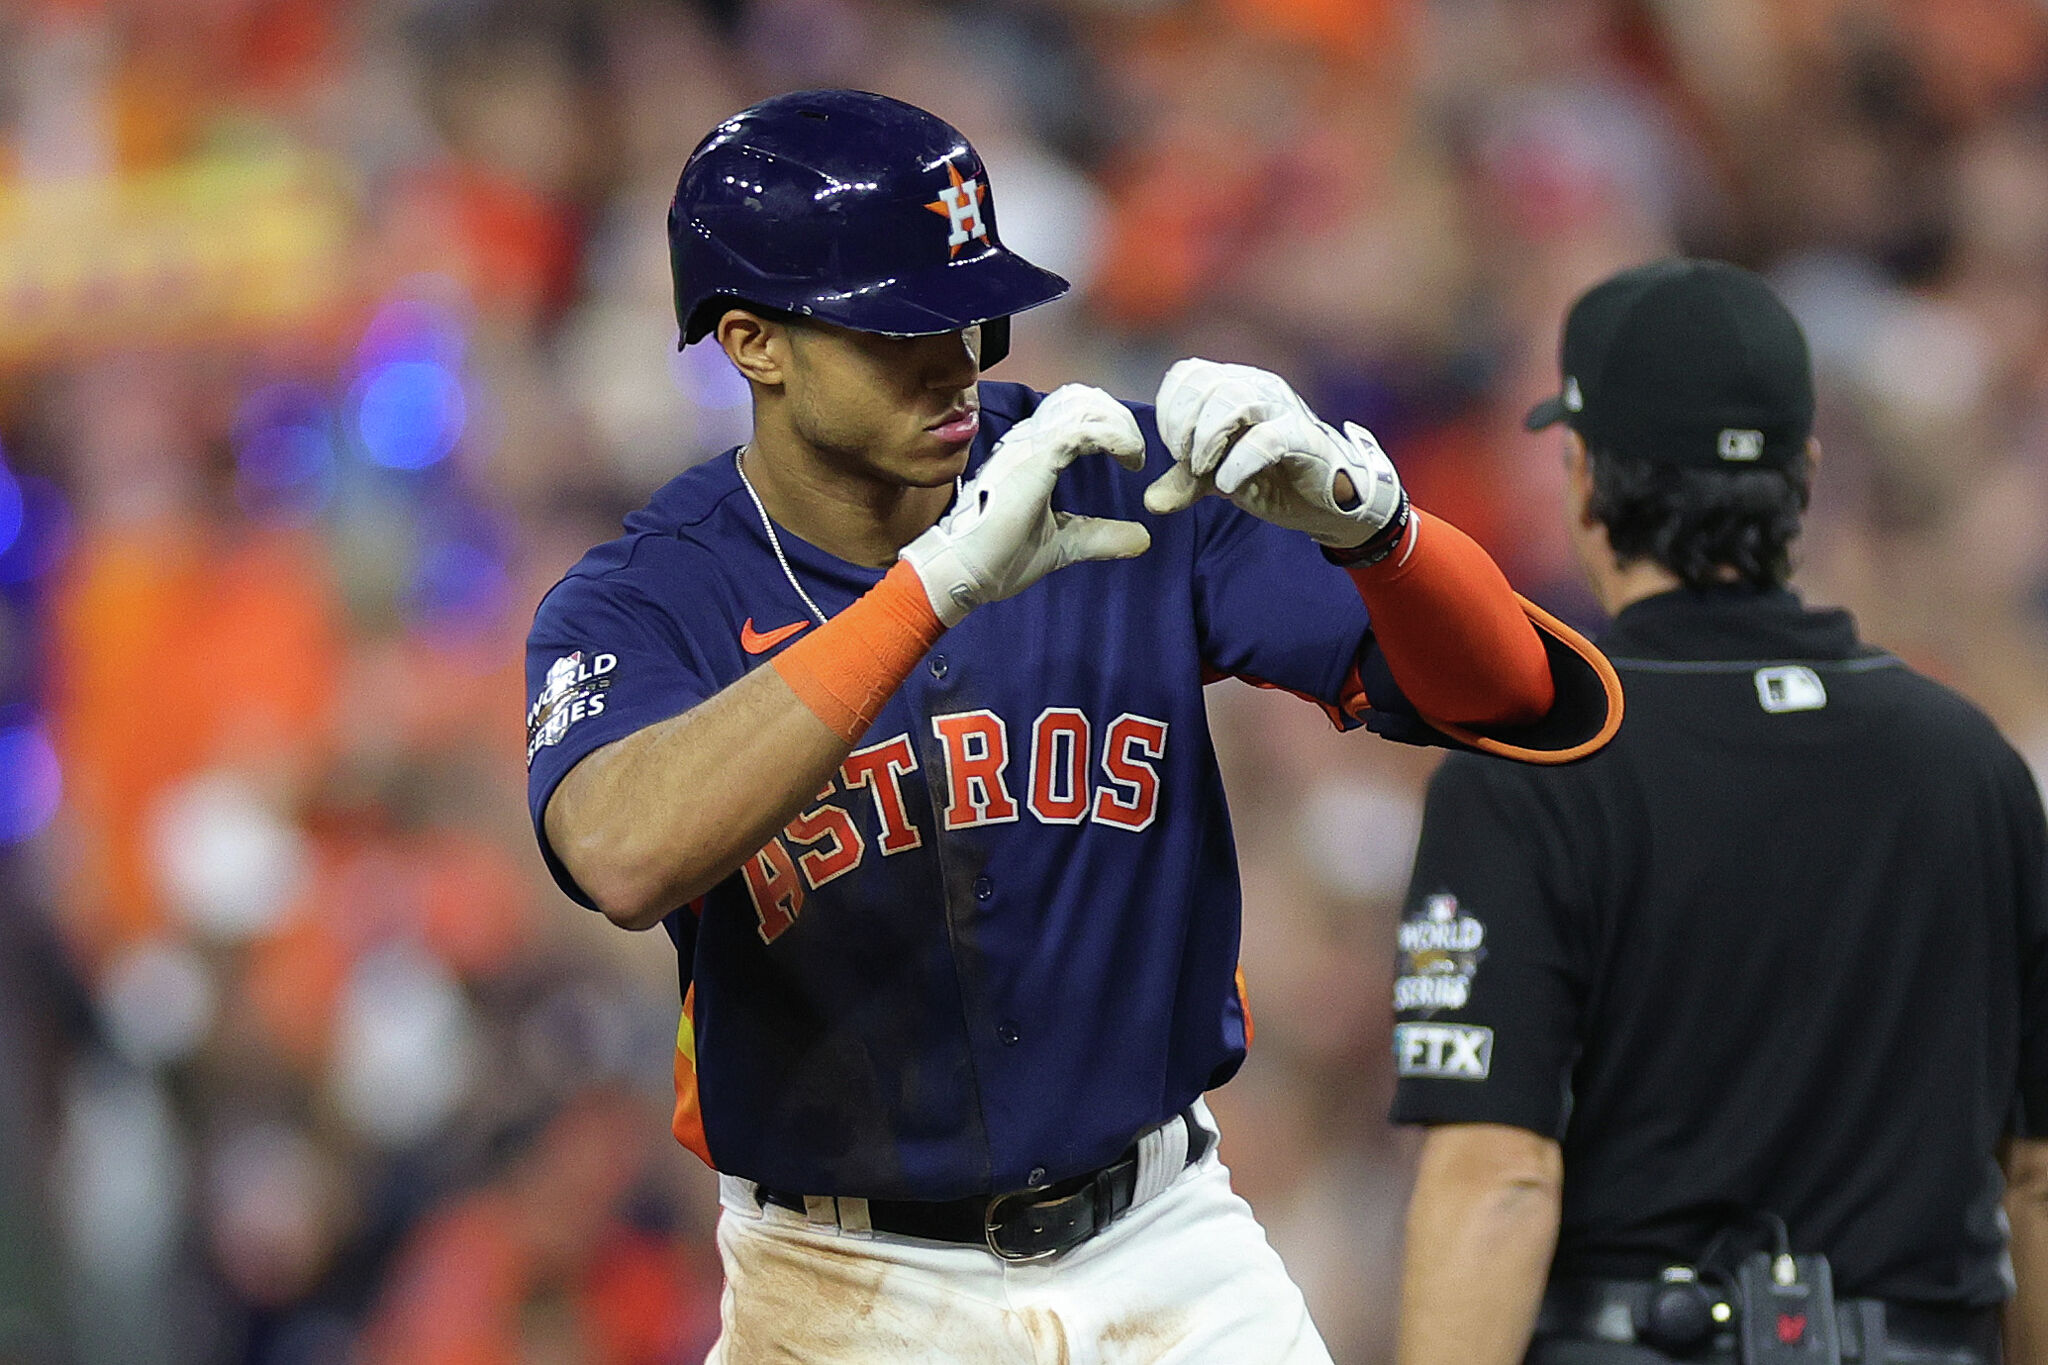 Why Astros' Jeremy Pena makes heart with hands to celebrate